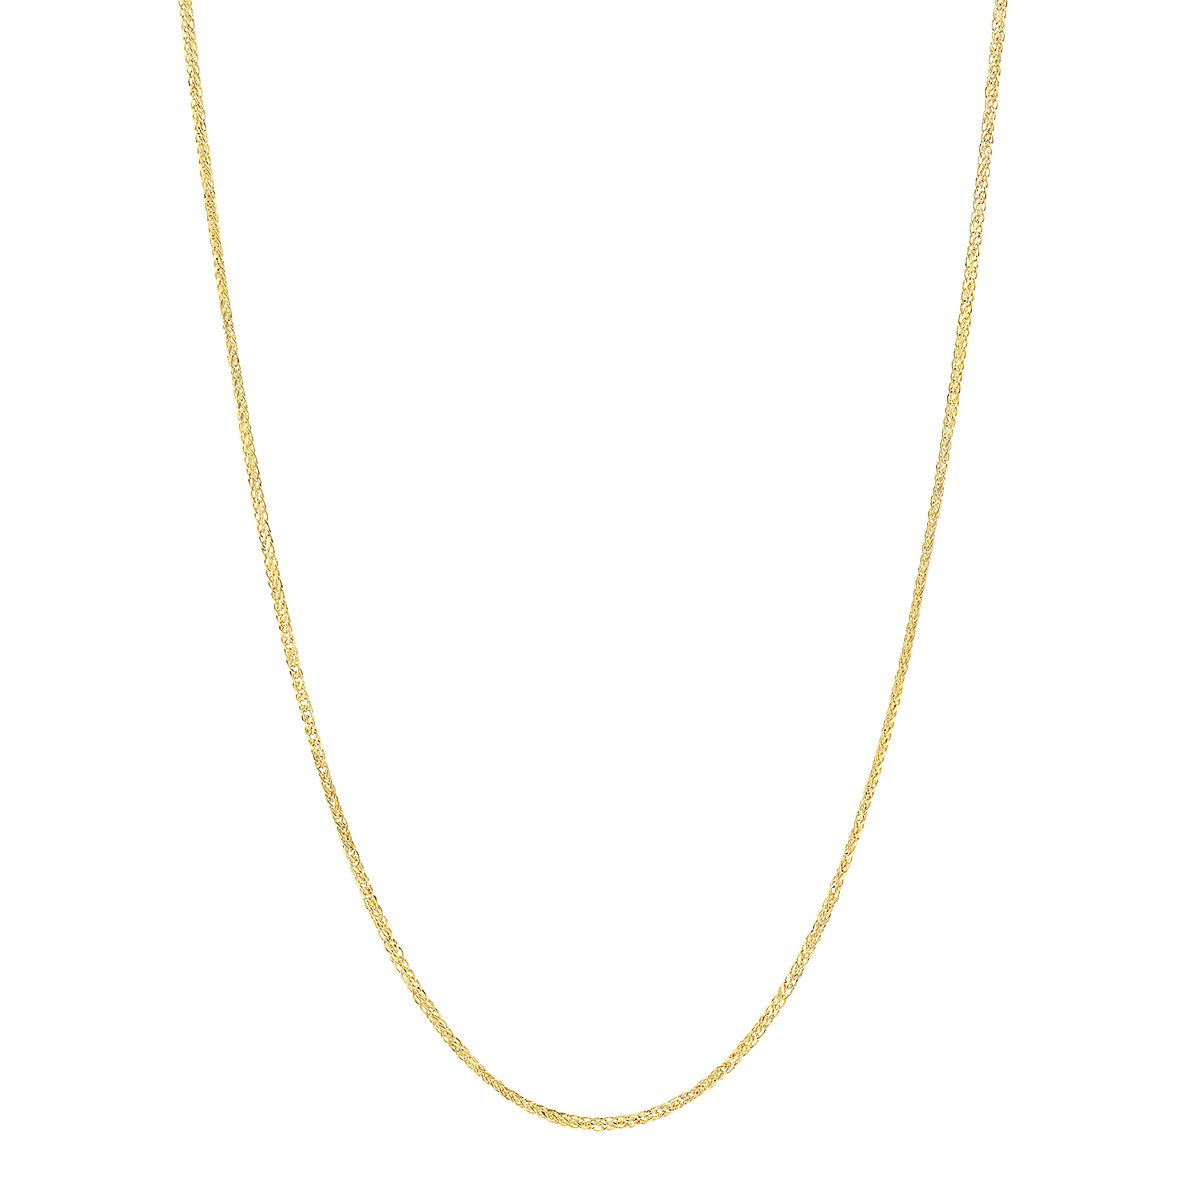 Yellow Gold 1.25 mm Hollow Square Wheat Chain, 24